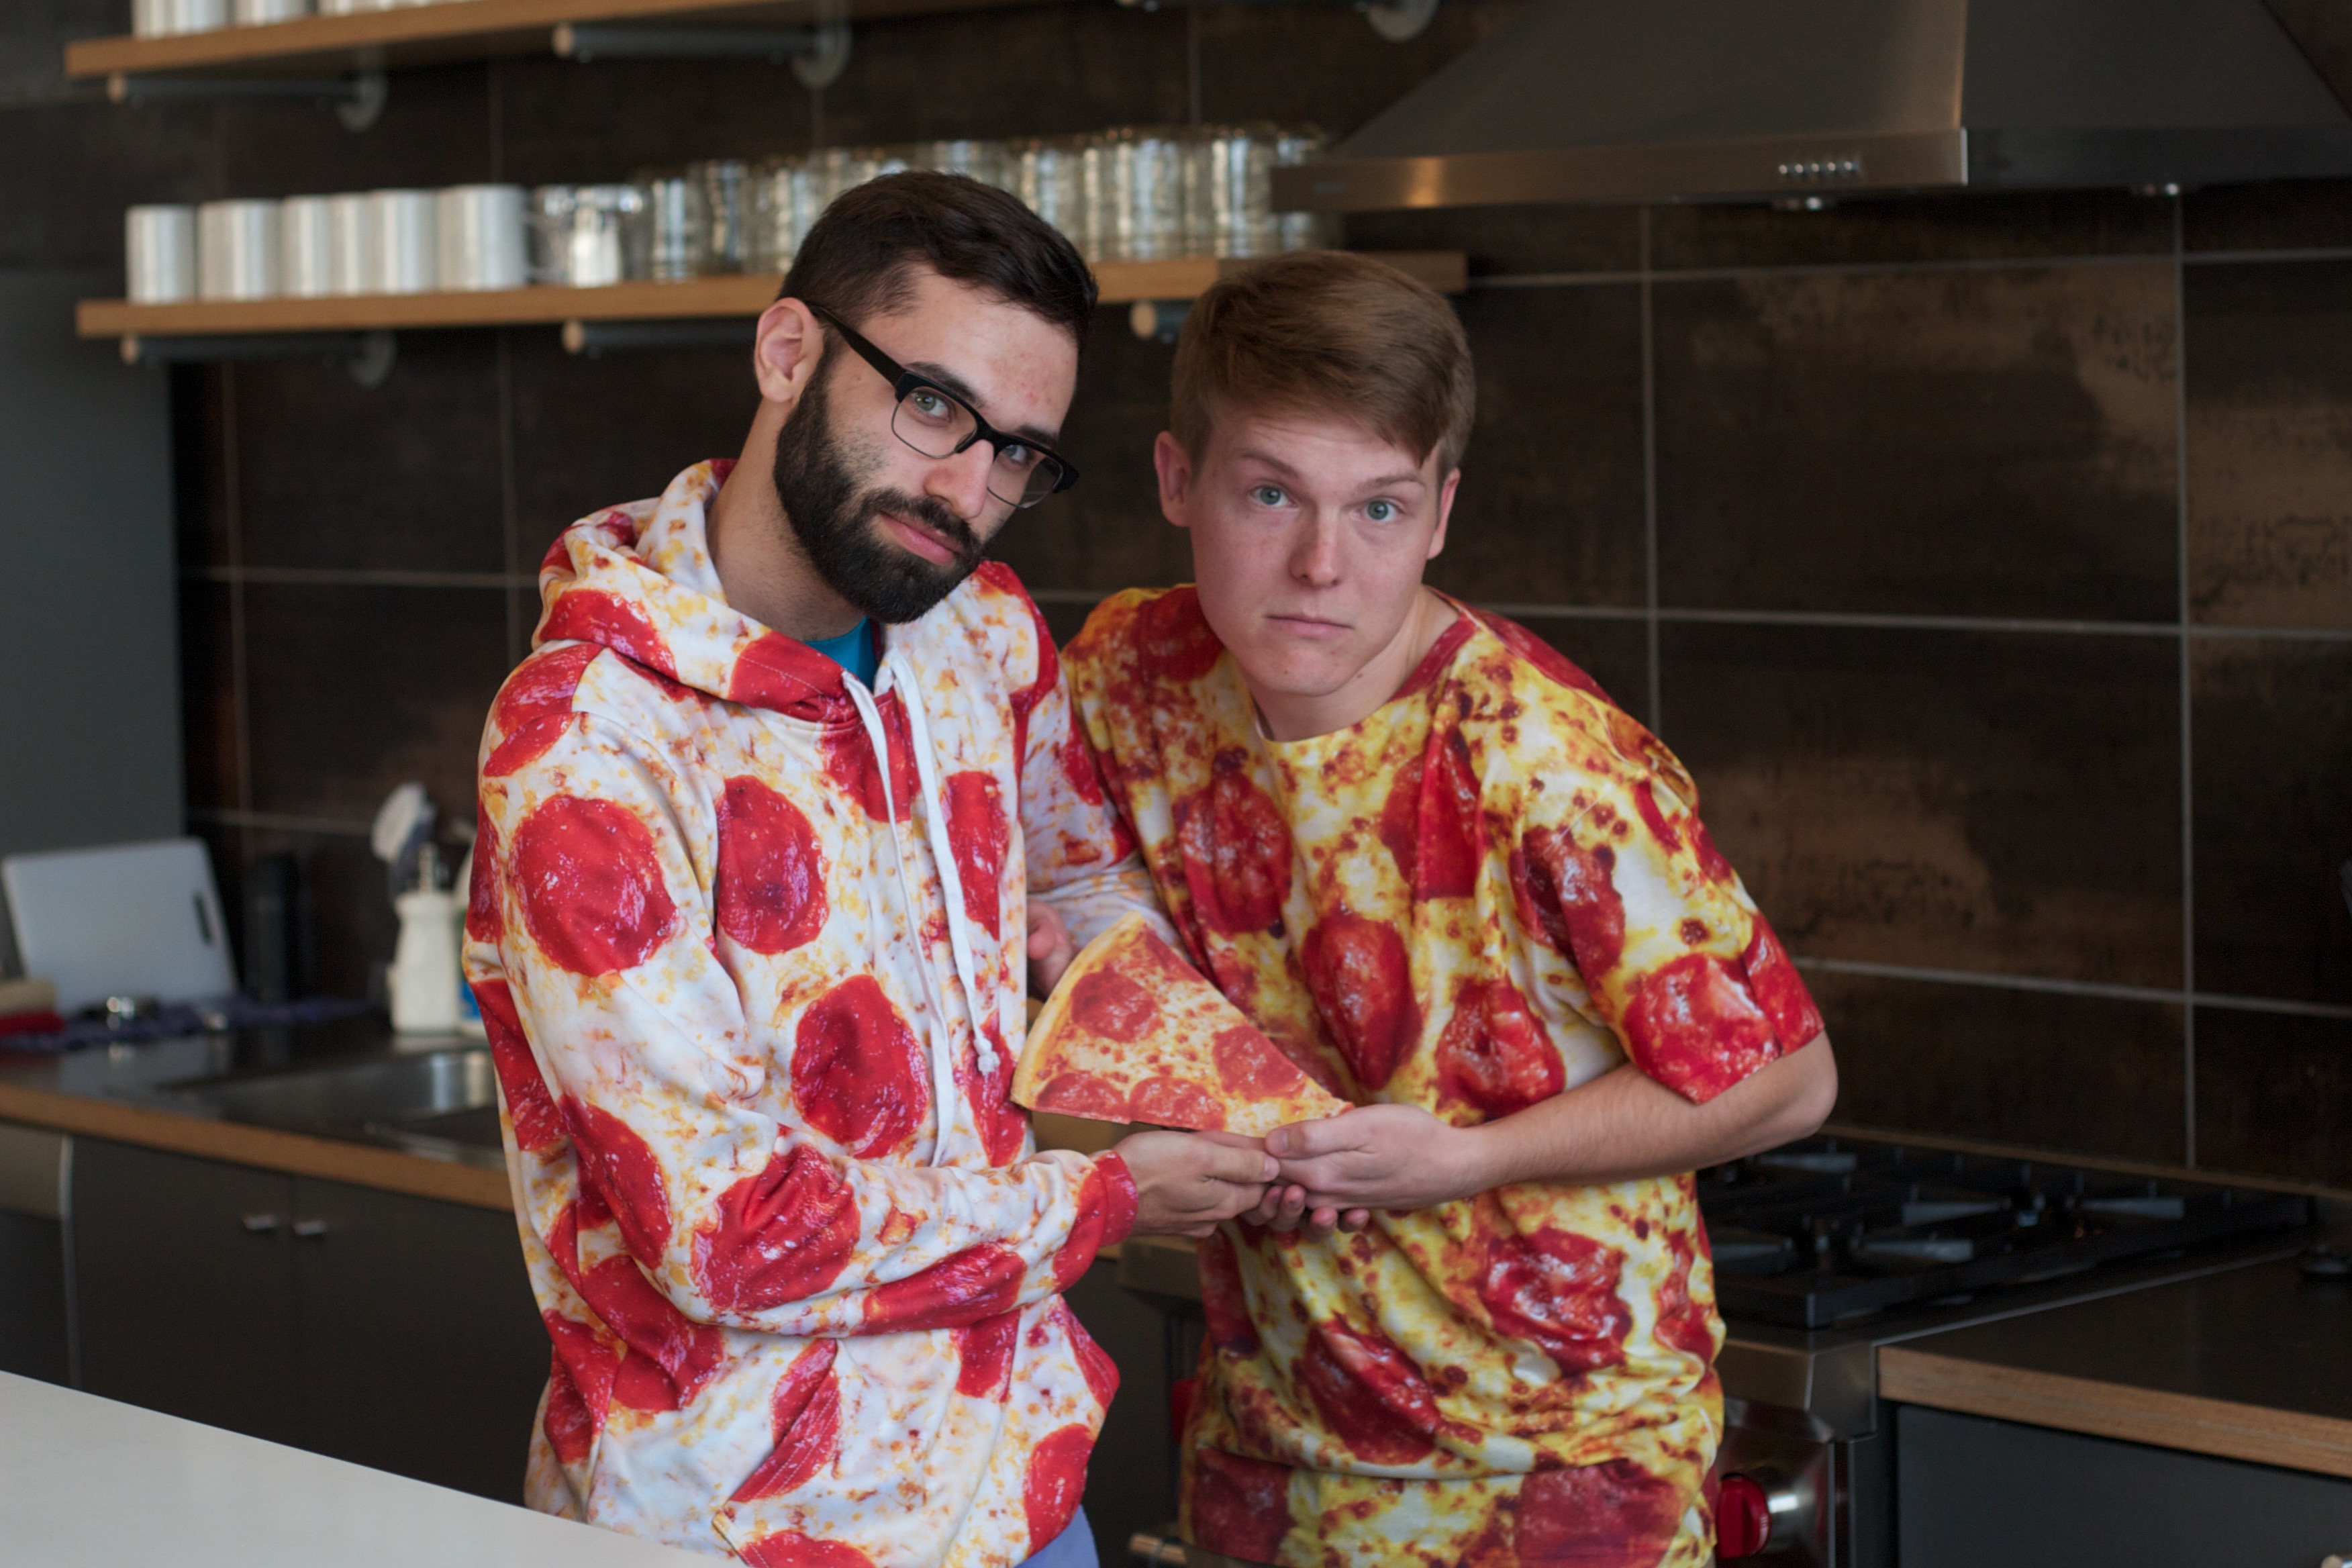 The Pizza Pals Duo Turns DJ Sets of Glitchy Pop Into Playable Video Games
